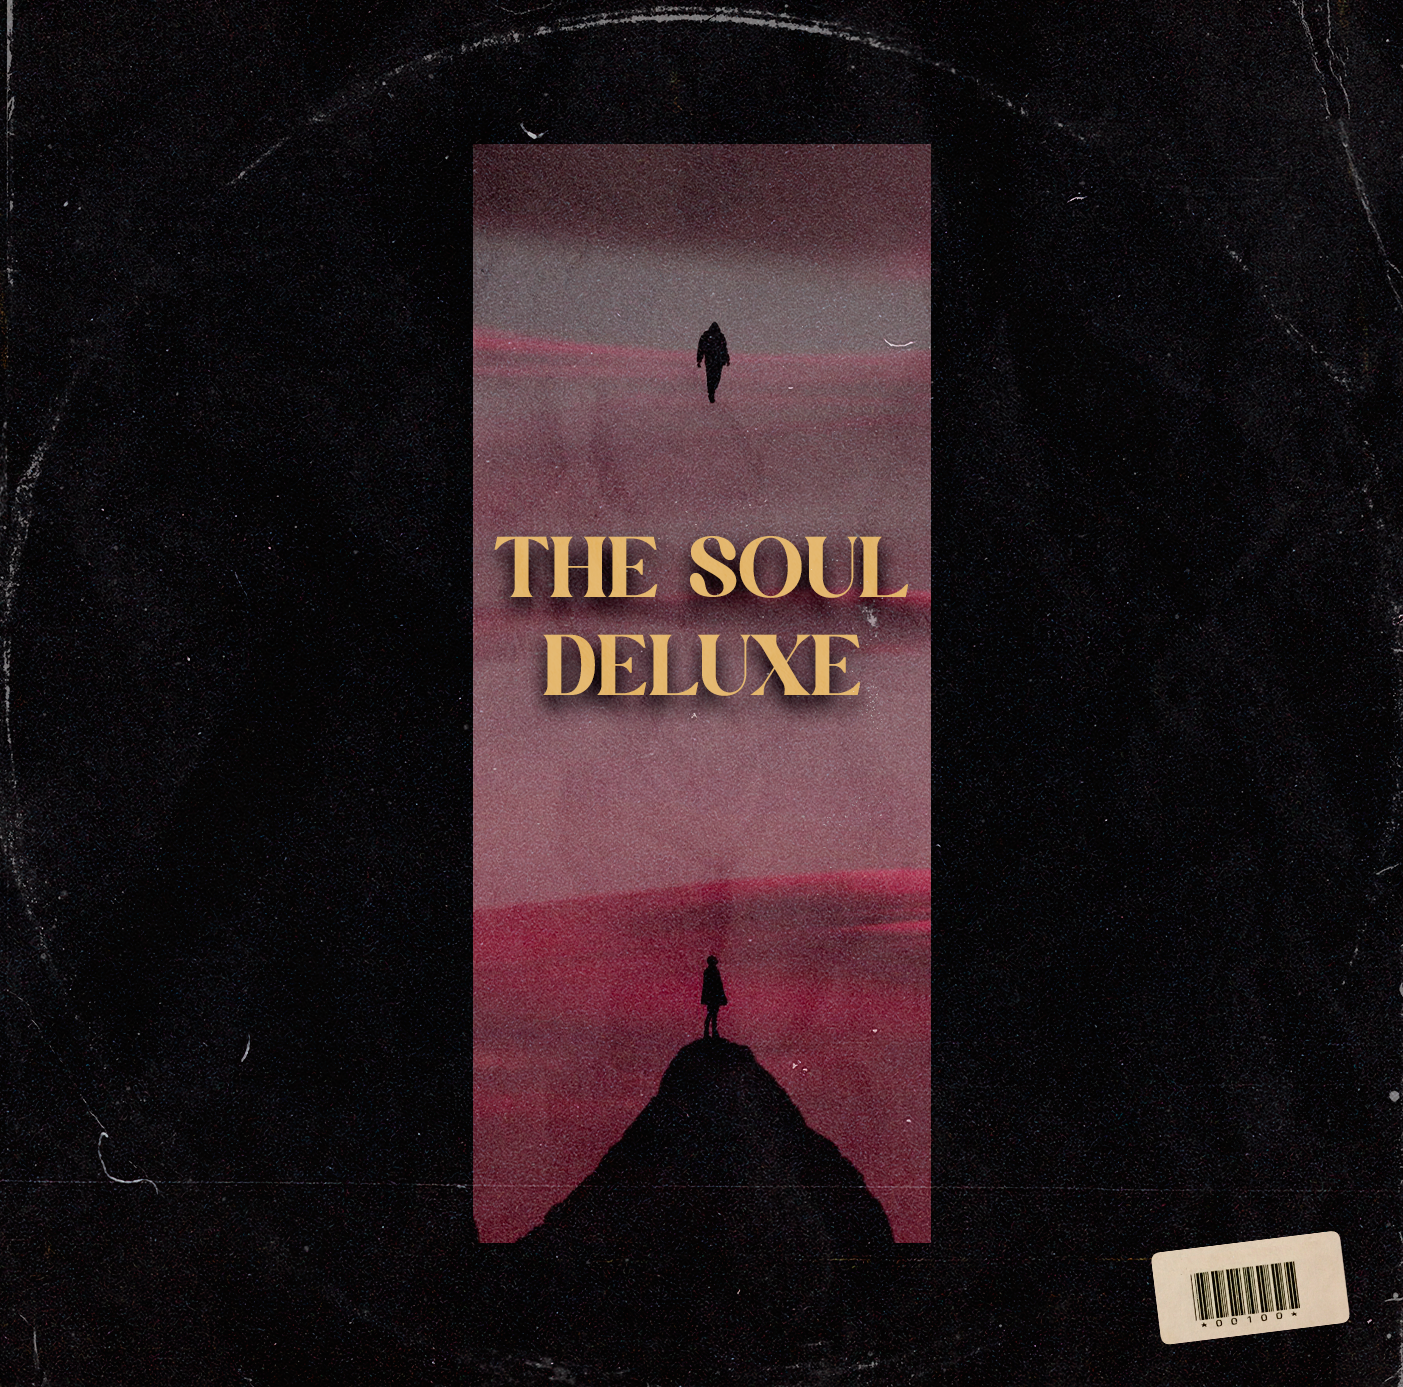 The Soul Deluxe